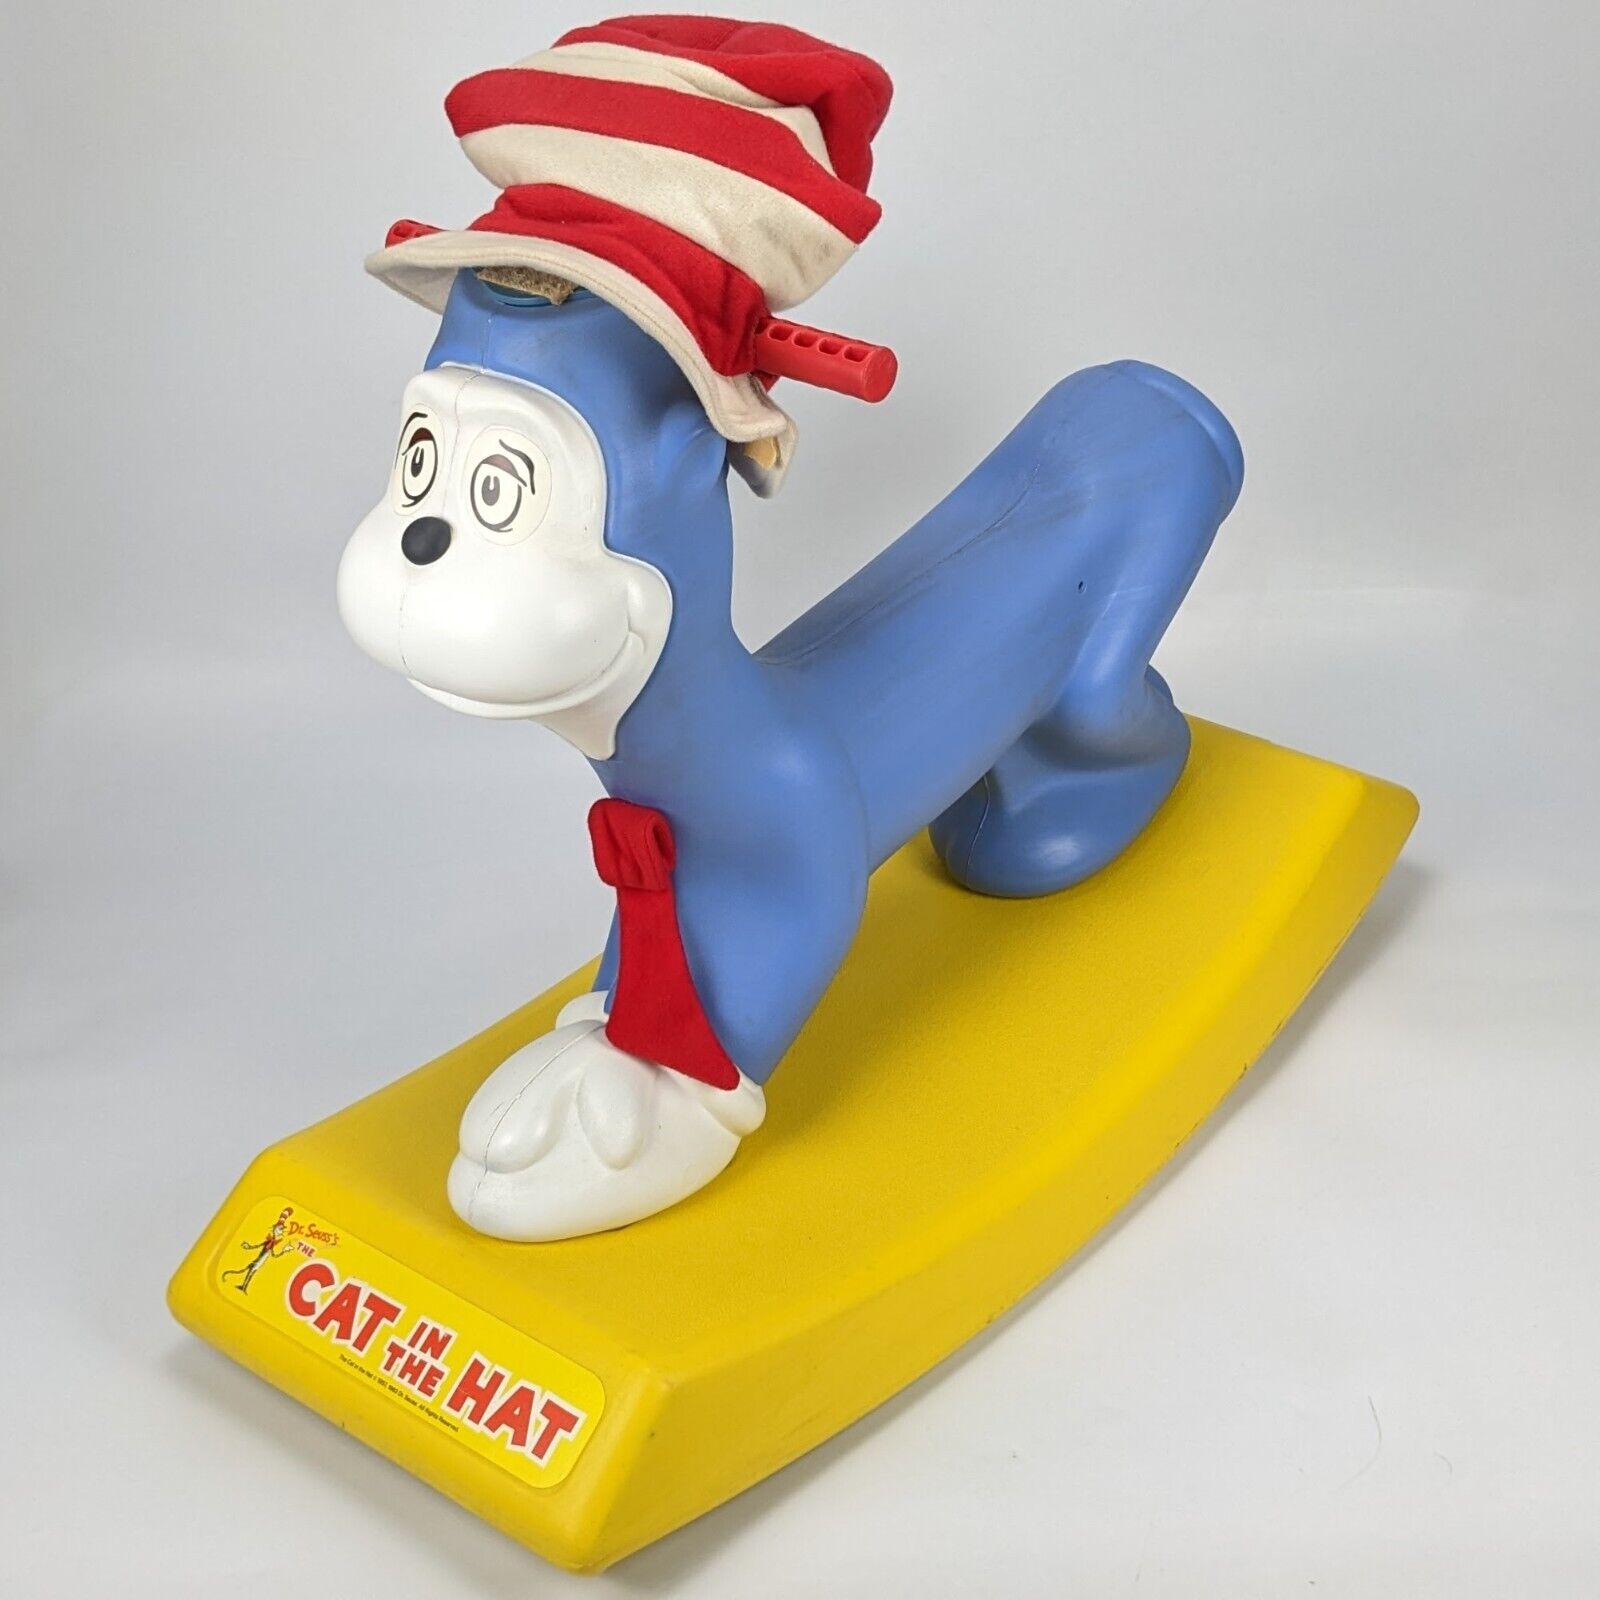 Coleco Cat in The Hat Rider Rocker Toy - vintage plastic kids